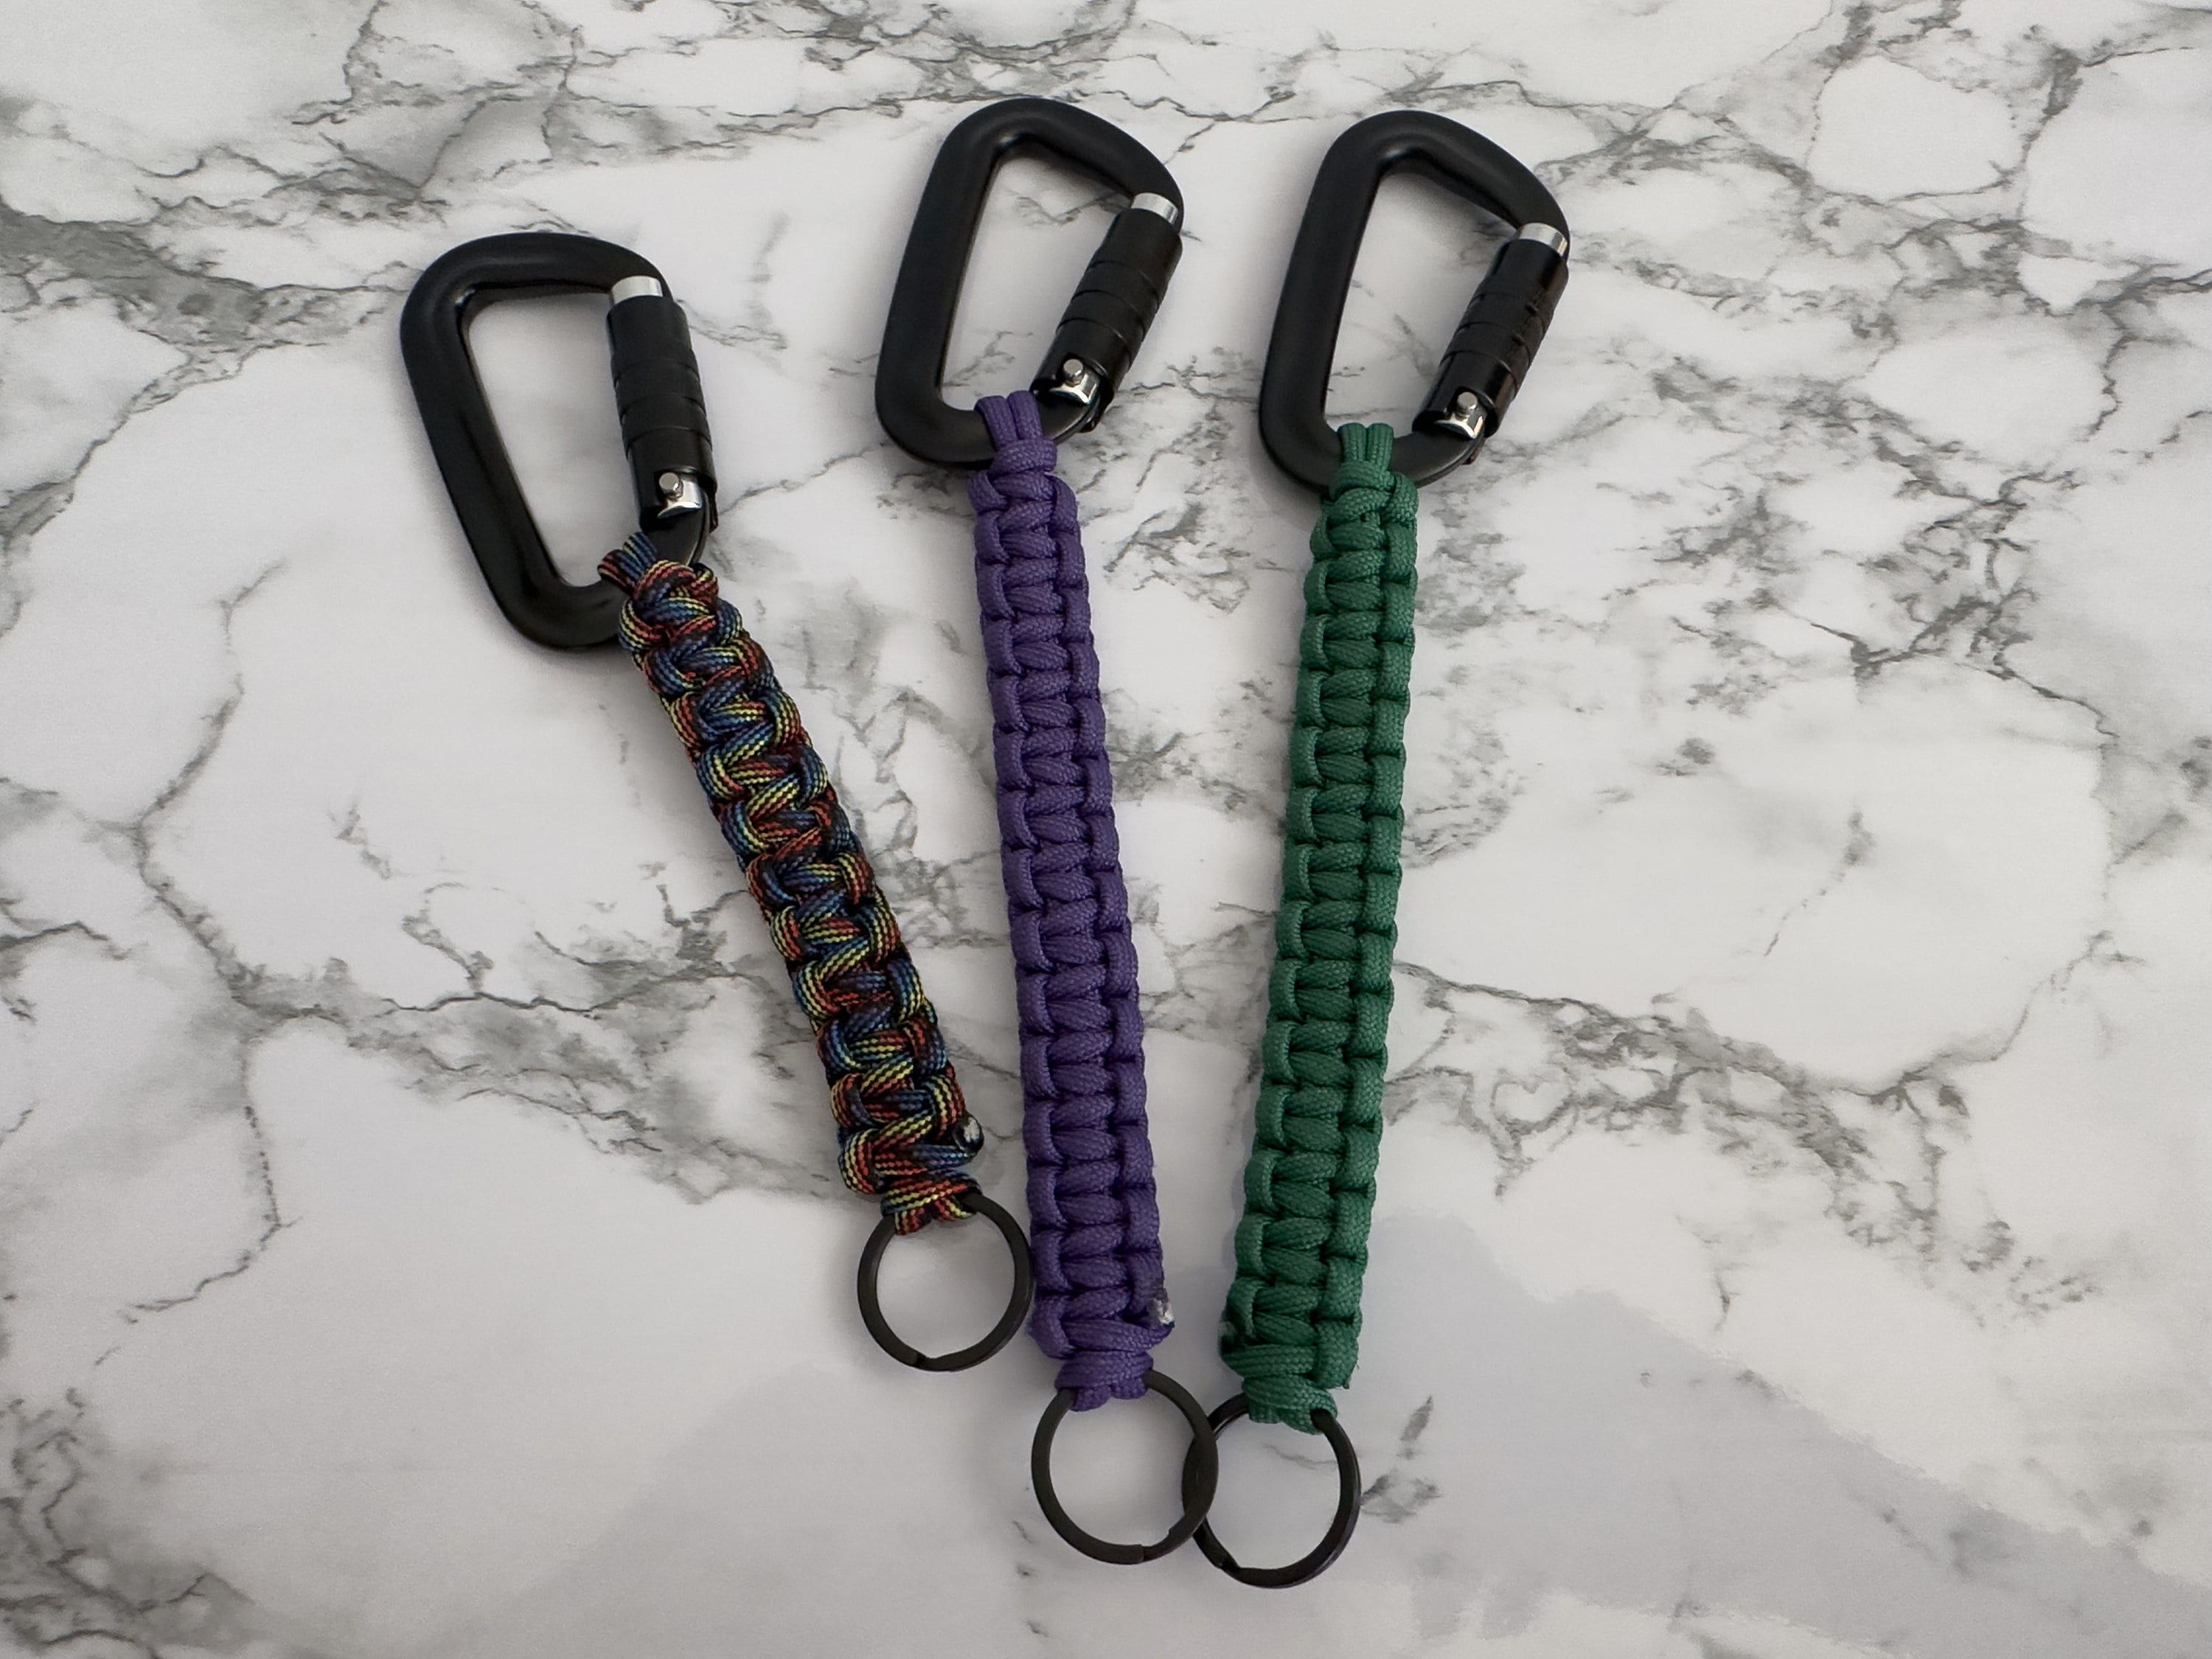 REHTAEL Paracord Keychain with Carabiner- Military Braided Paracord Carabiner Keychain Clip with Strap for Keys/Men/Women